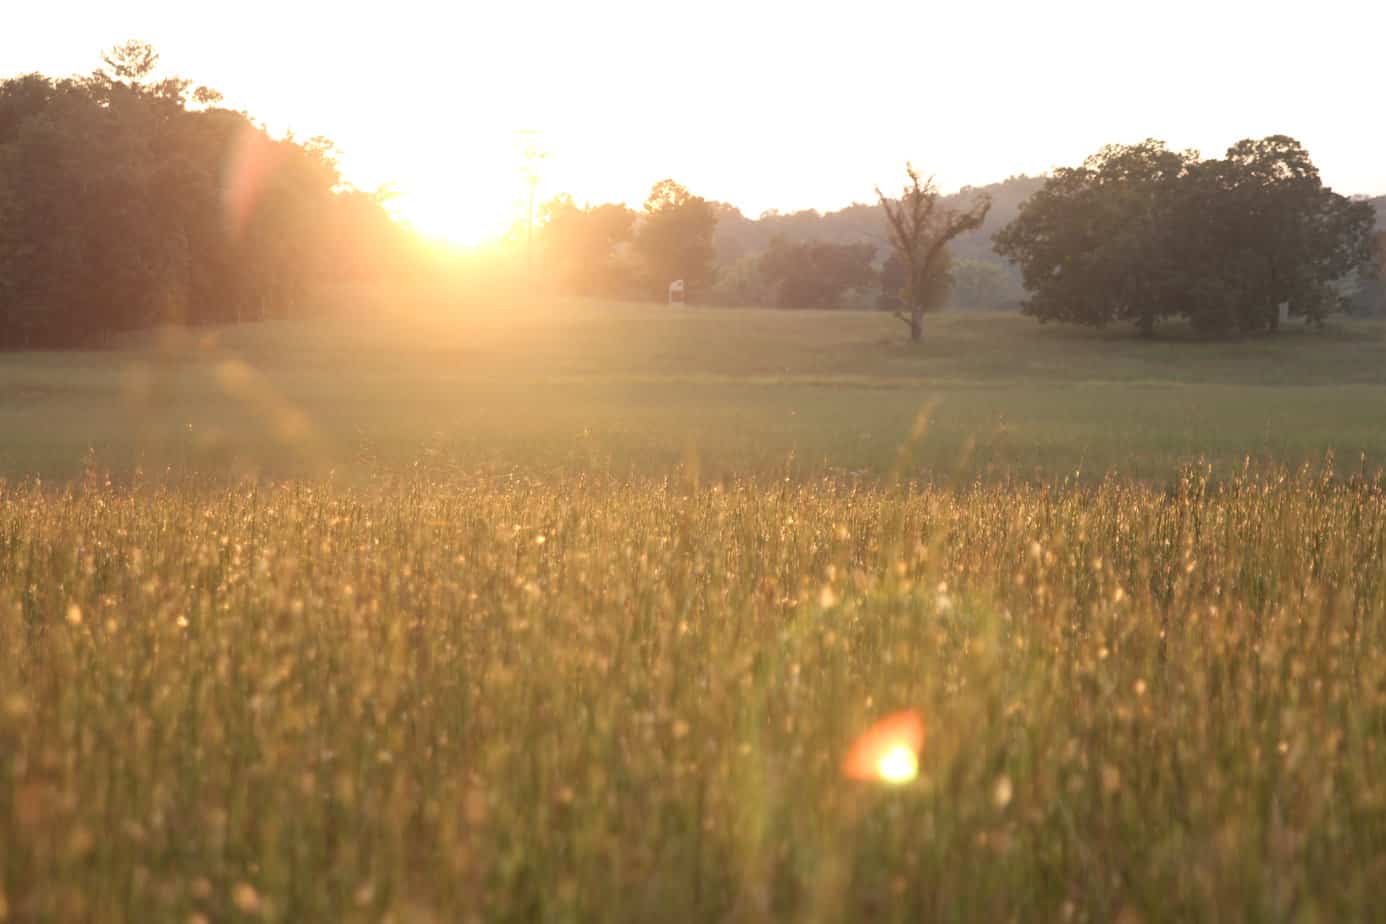 Morning sunshine gilds the quiet grasses of Dyer Field. Dyer Field was a scene of intense fighting in the Battle of Chickamauga.